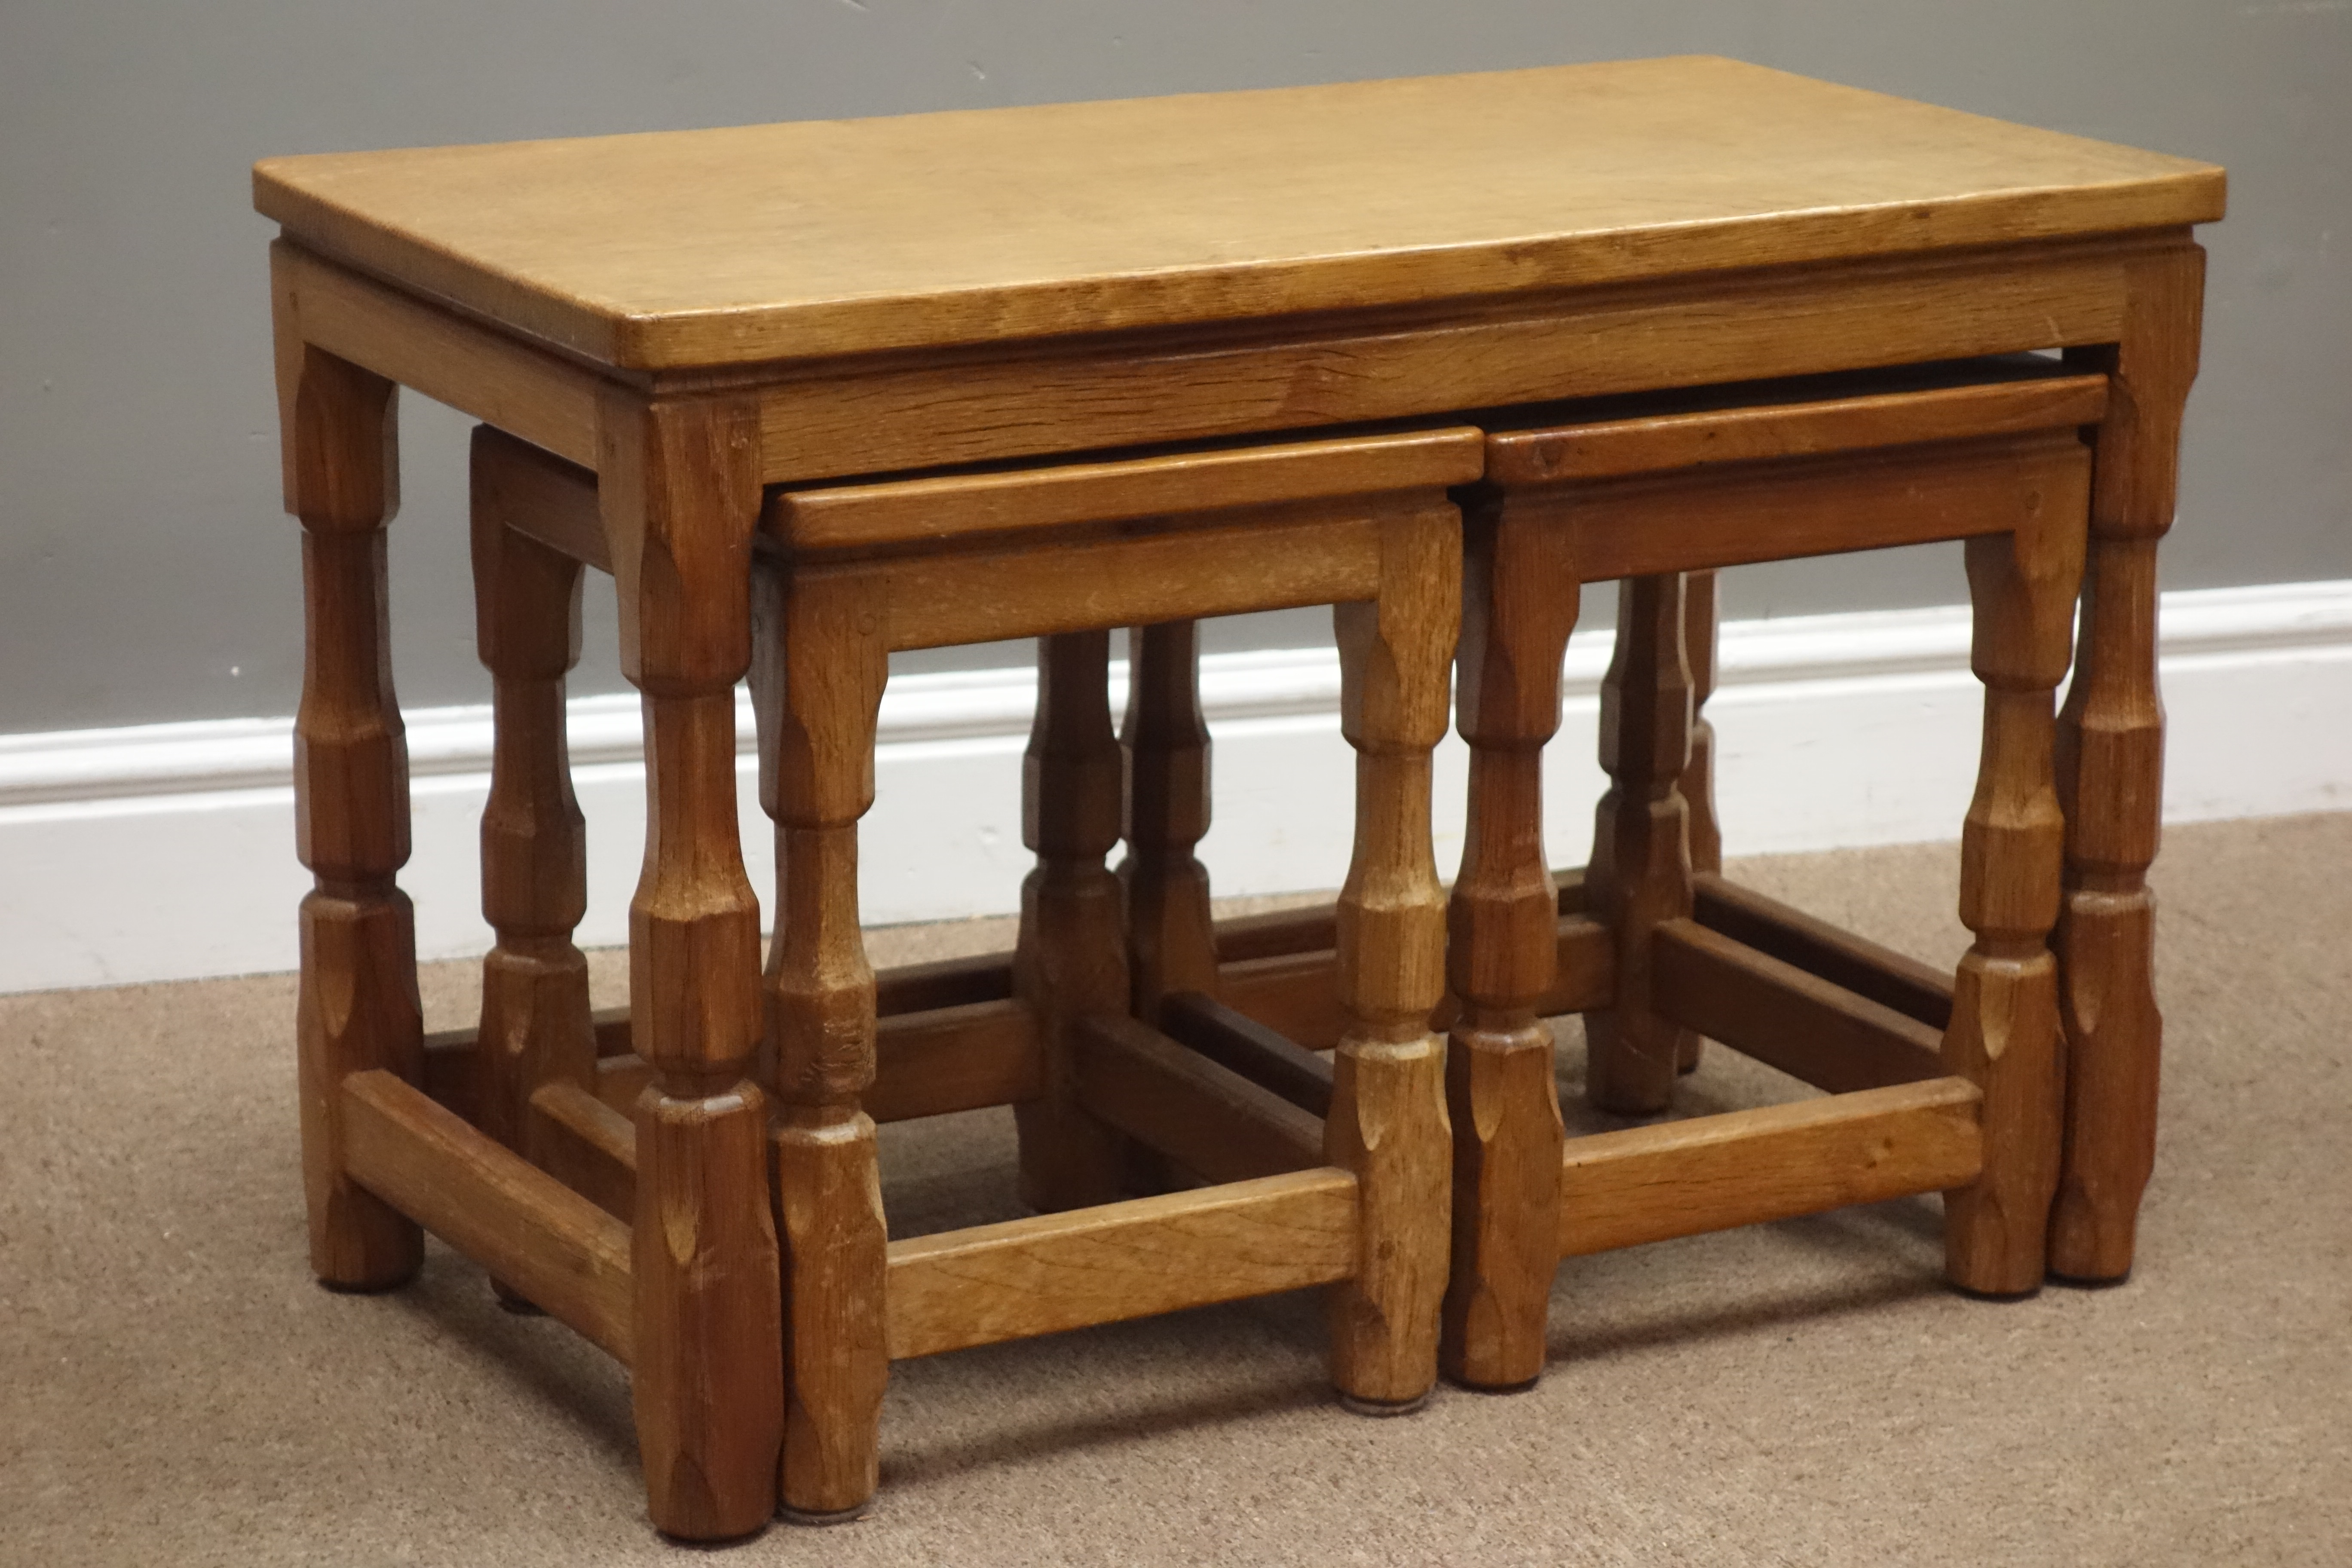 Yorkshire oak - nest of three tables with adzed tops by Sid Pollard of Bagby, 68cm x 37cm,